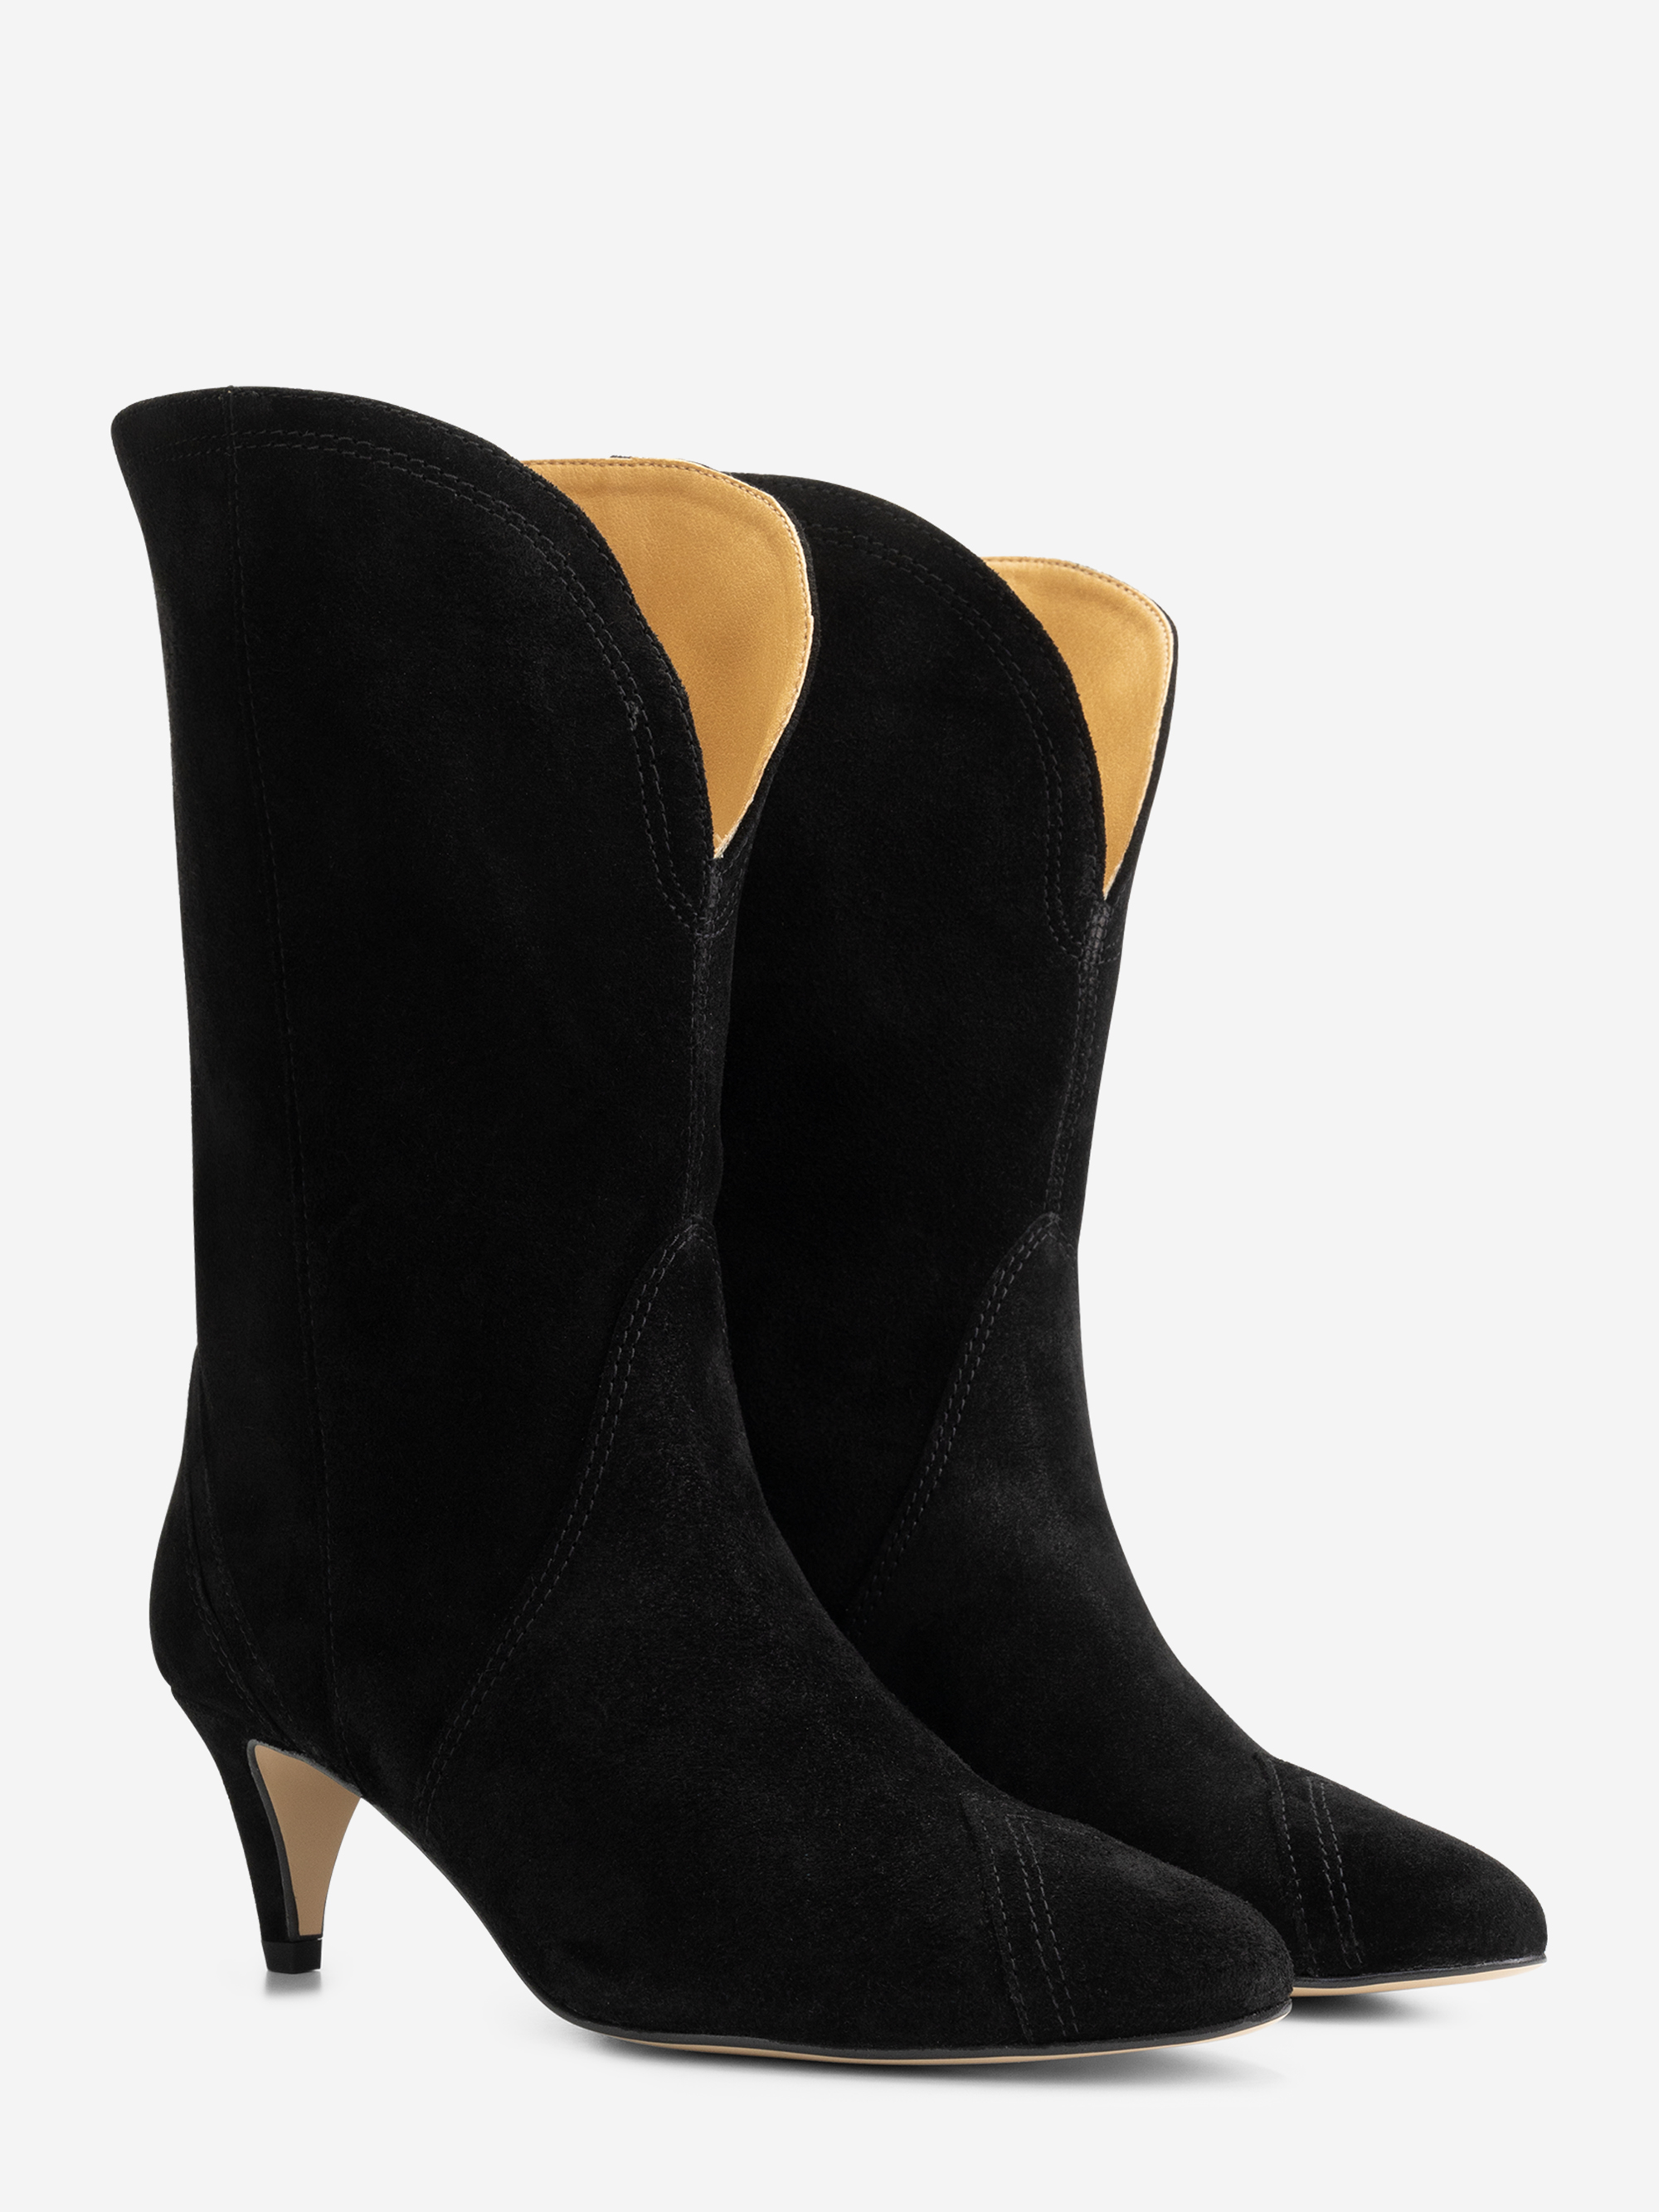 Suede boots with mid heel